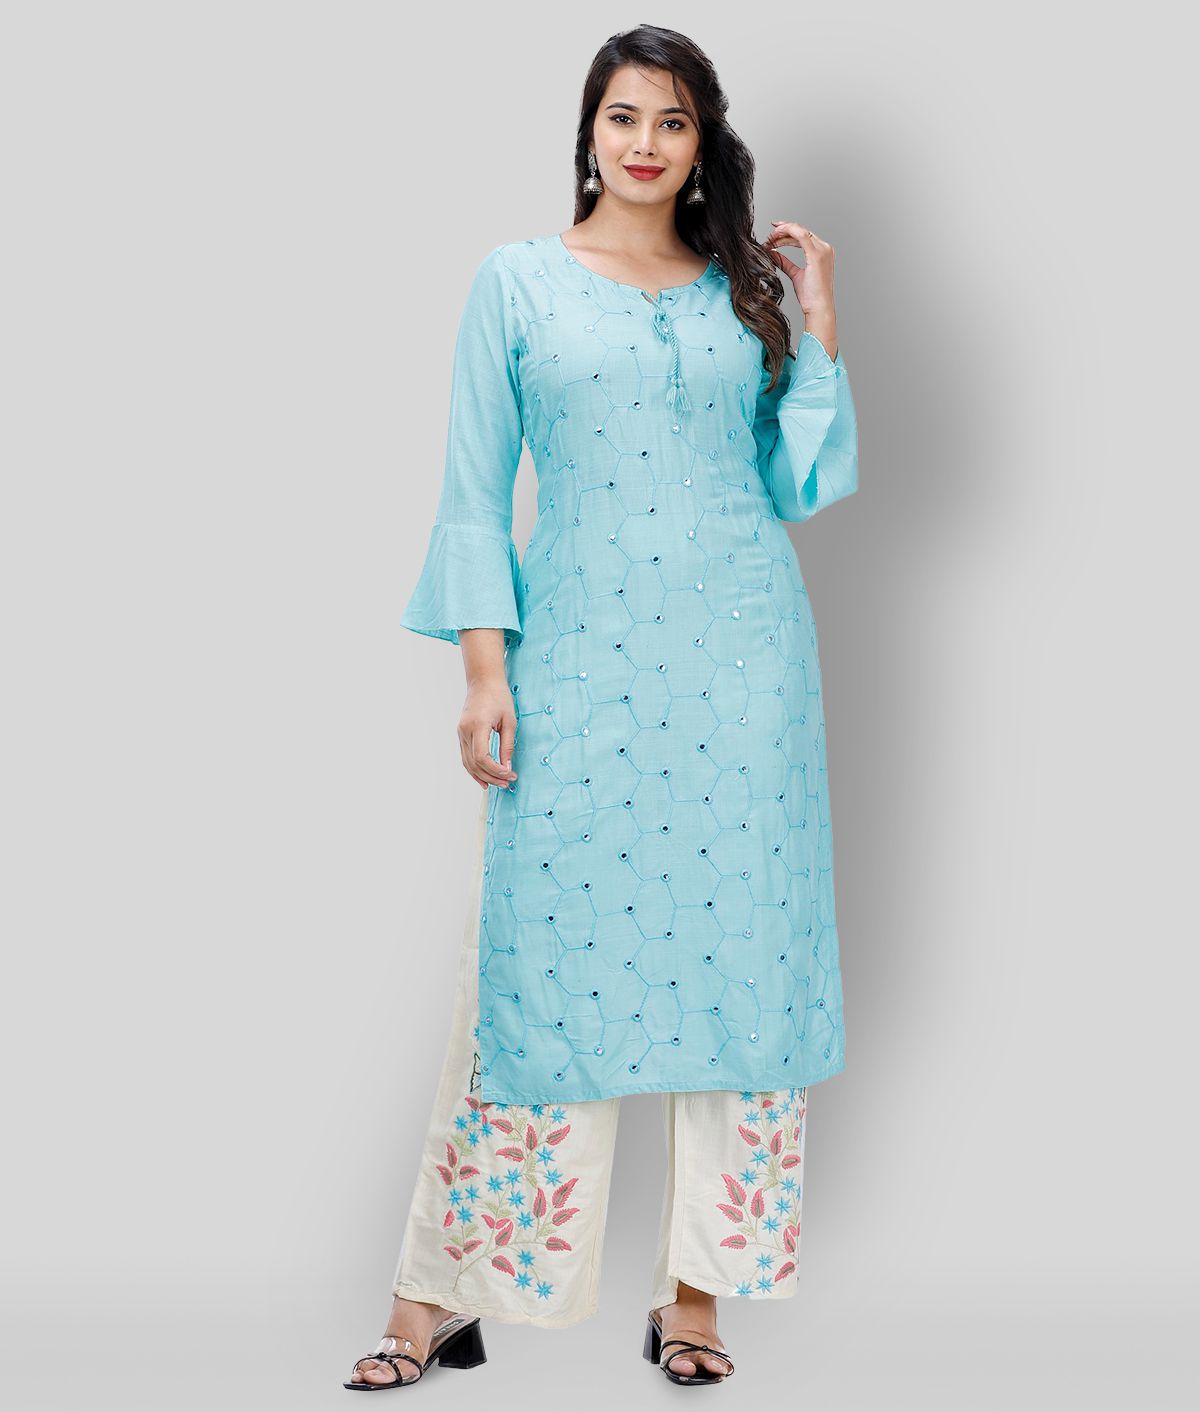     			Jaipuri Collection - Light Blue Straight Rayon Women's Stitched Salwar Suit ( Pack of 1 )